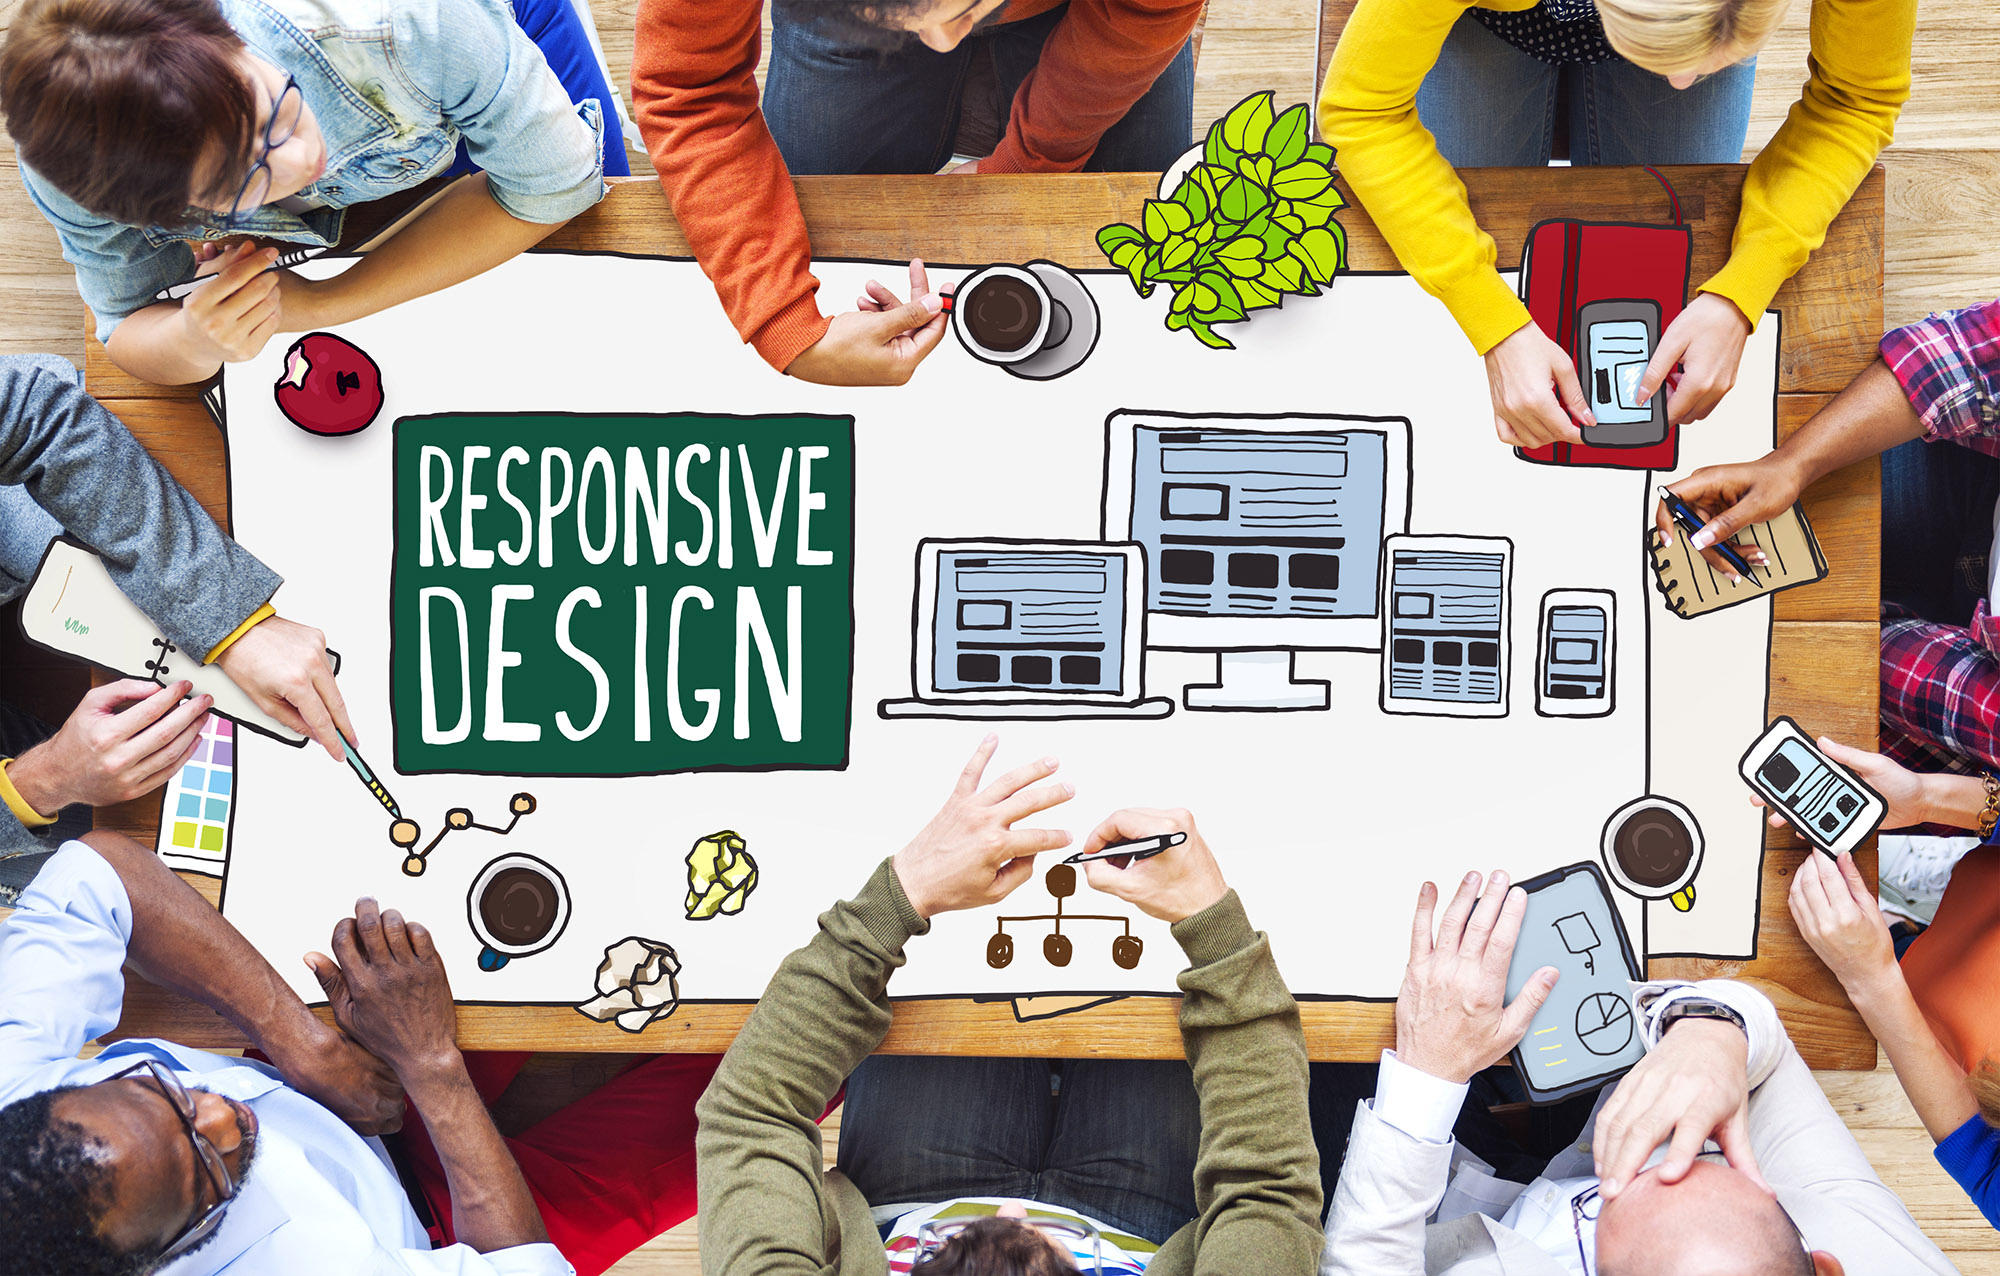 Responsive Design 101: Creating a Flexible Layout for All Screens